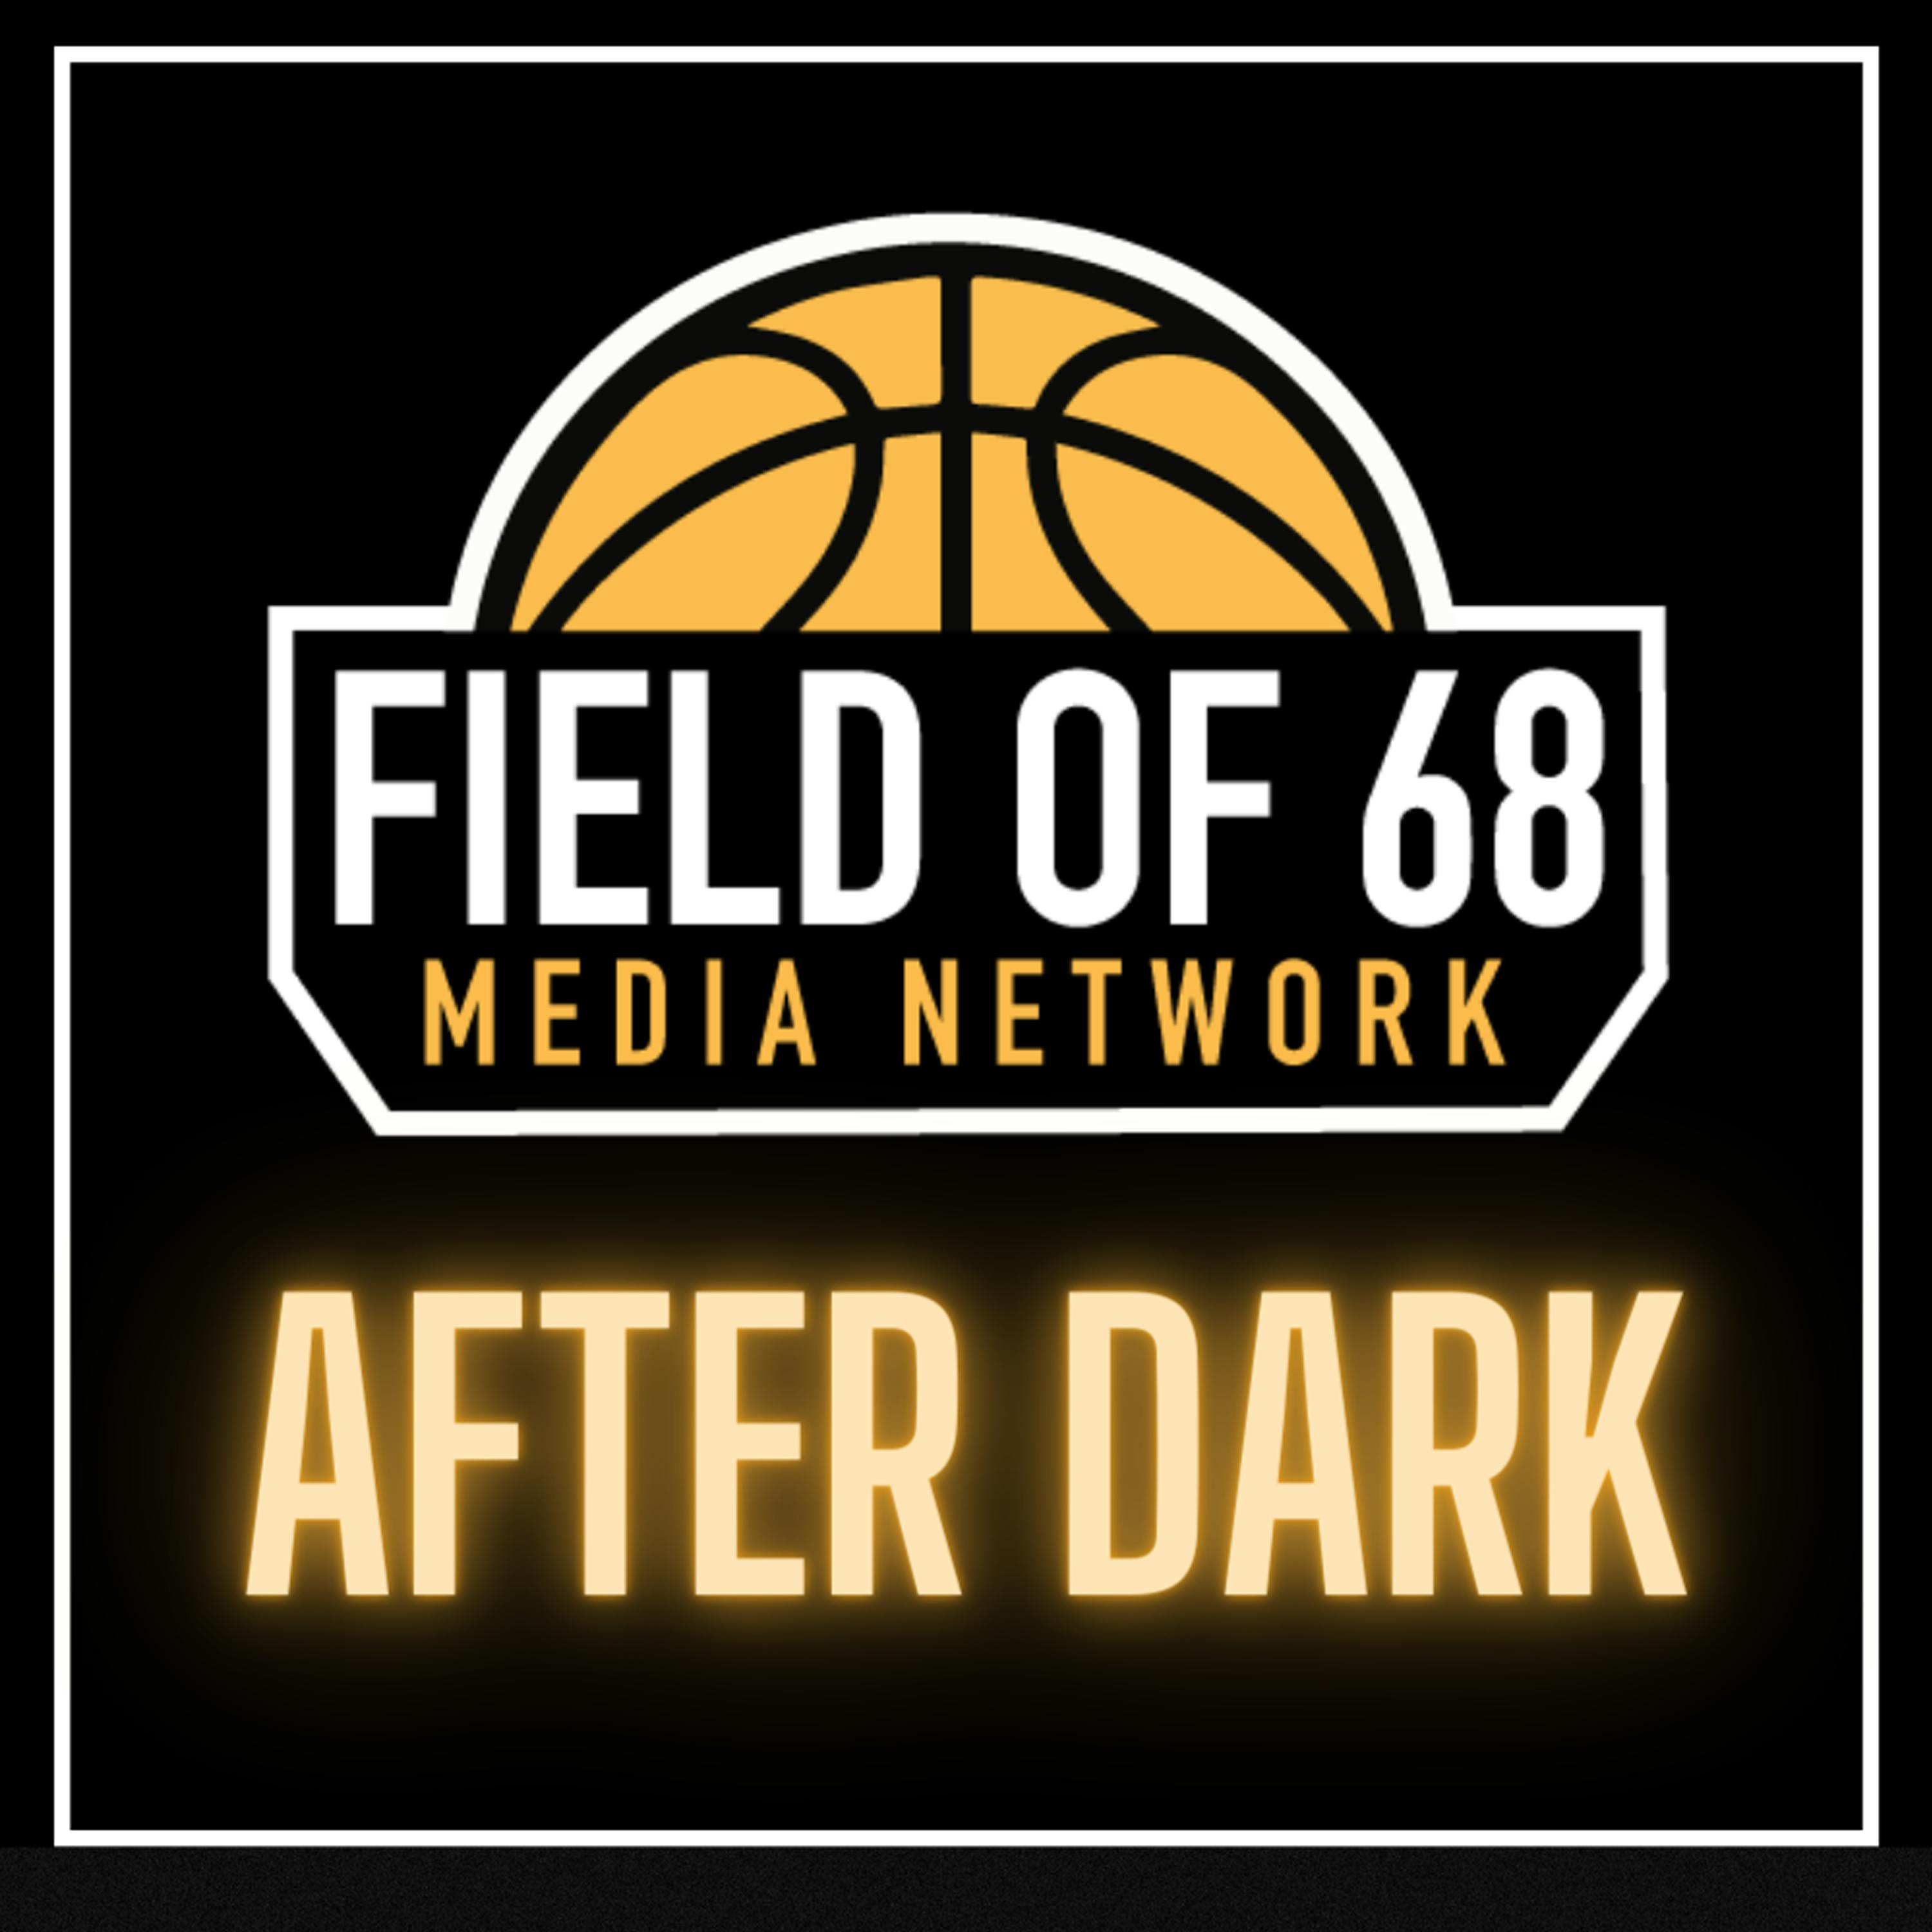 The Field of 68's Big Fat College Basketball Quiz! Plus, Cuonzo Martin joins us live in Phoenix! | AFTER DARK